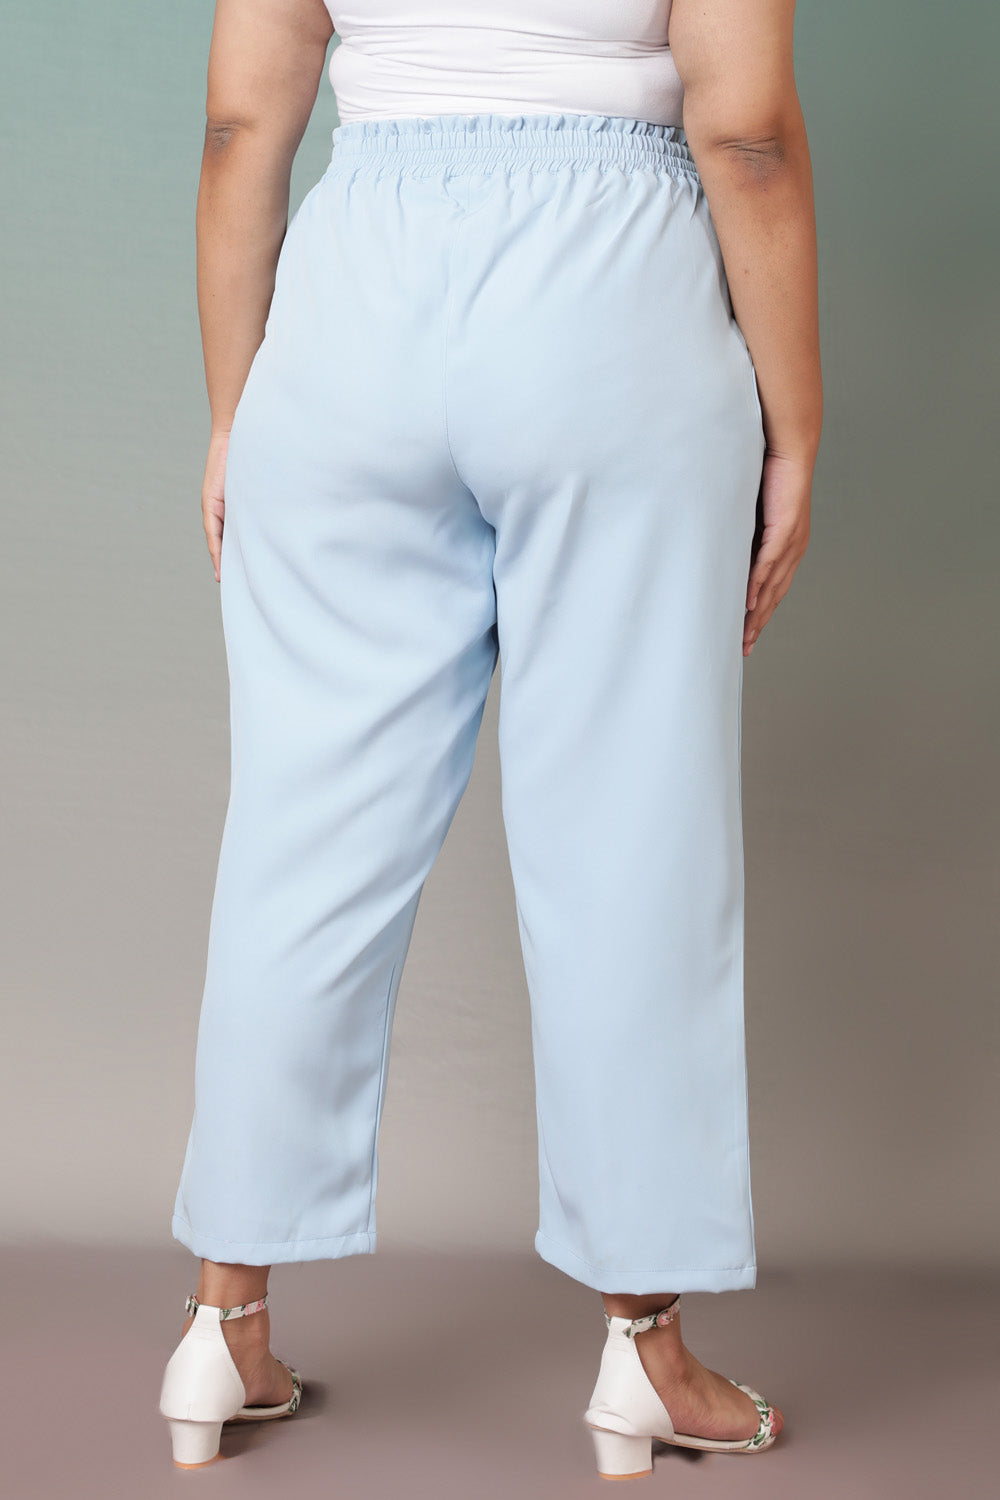 Buy Xtra Ordinary by Highlander Highlander Ice Blue Plus Size Slim Fit  Trouser for Men Online at Rs814  Ketch